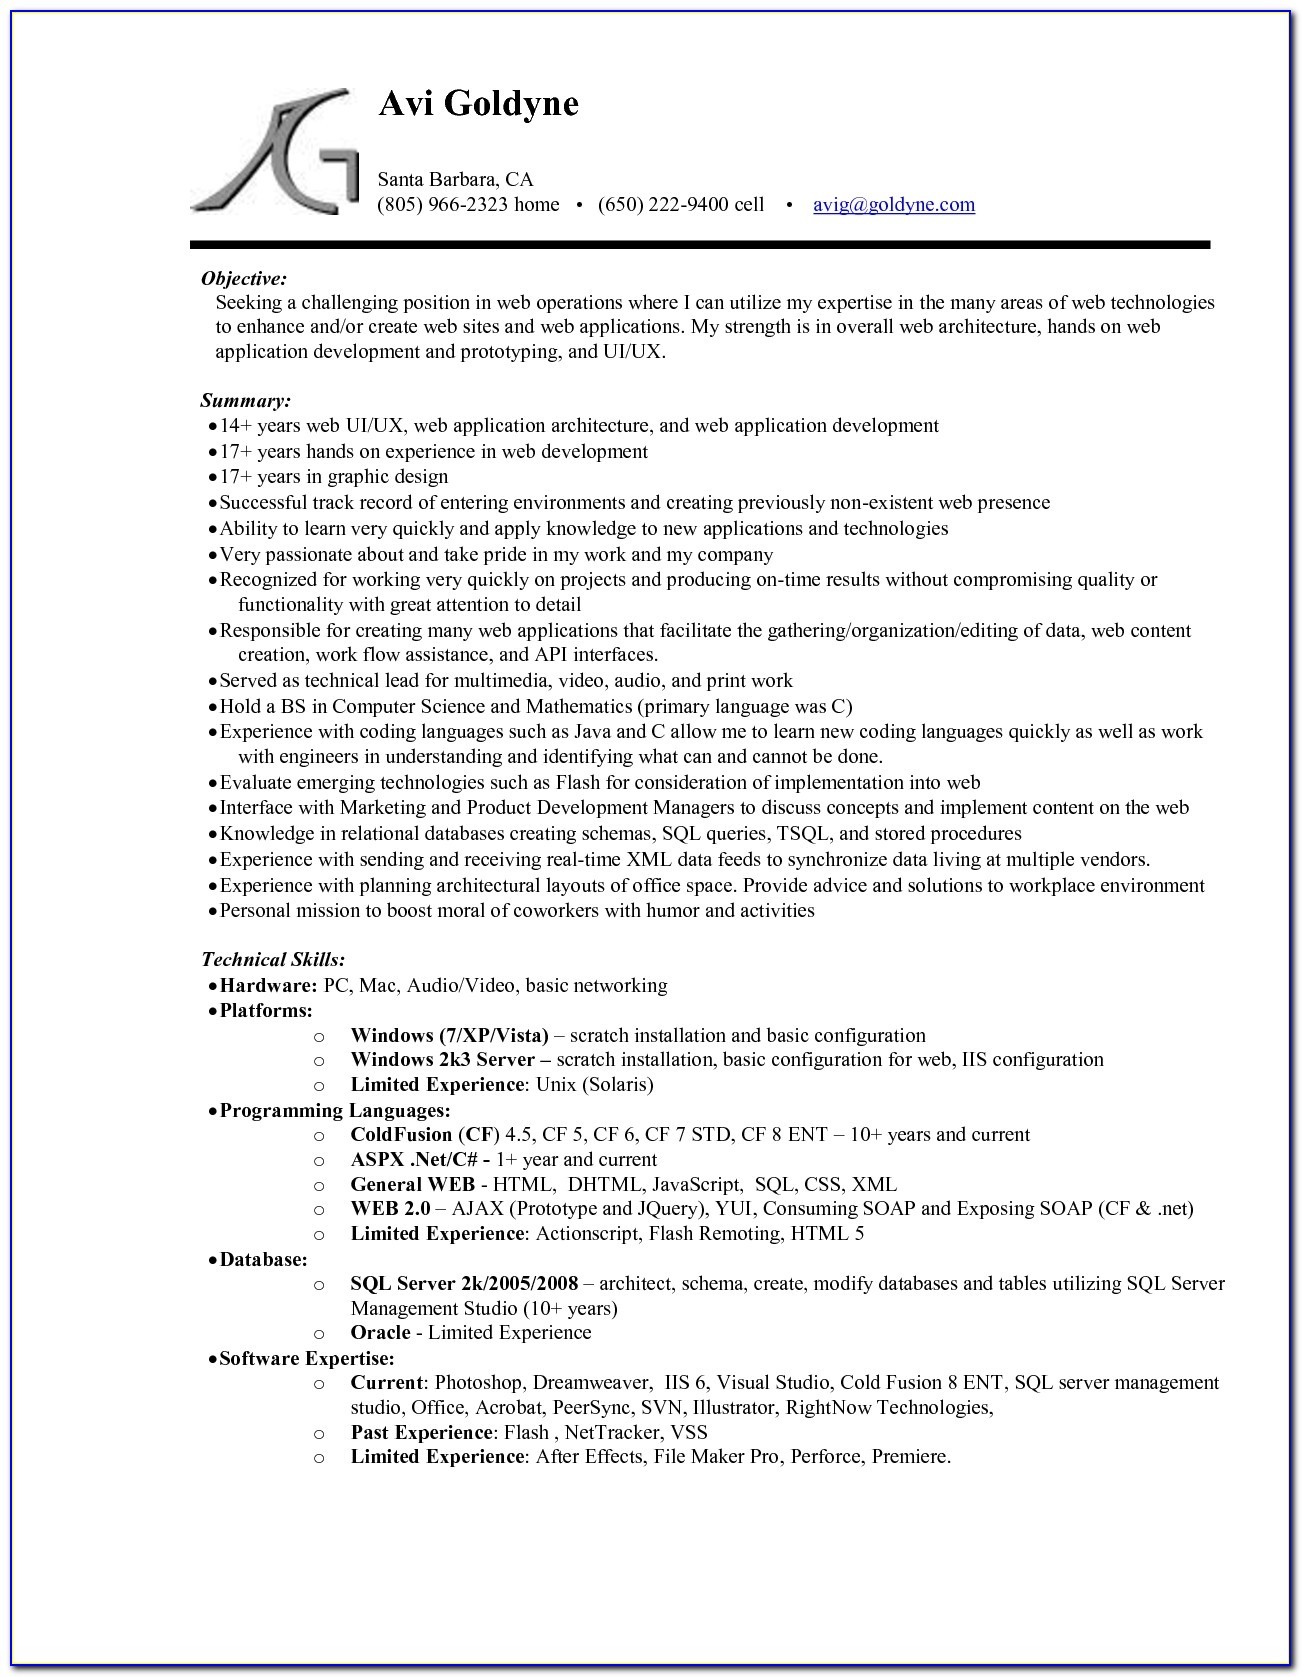 Is There A Resume Template In Microsoft Word For Mac Pertaining To Resume Templates For Mac